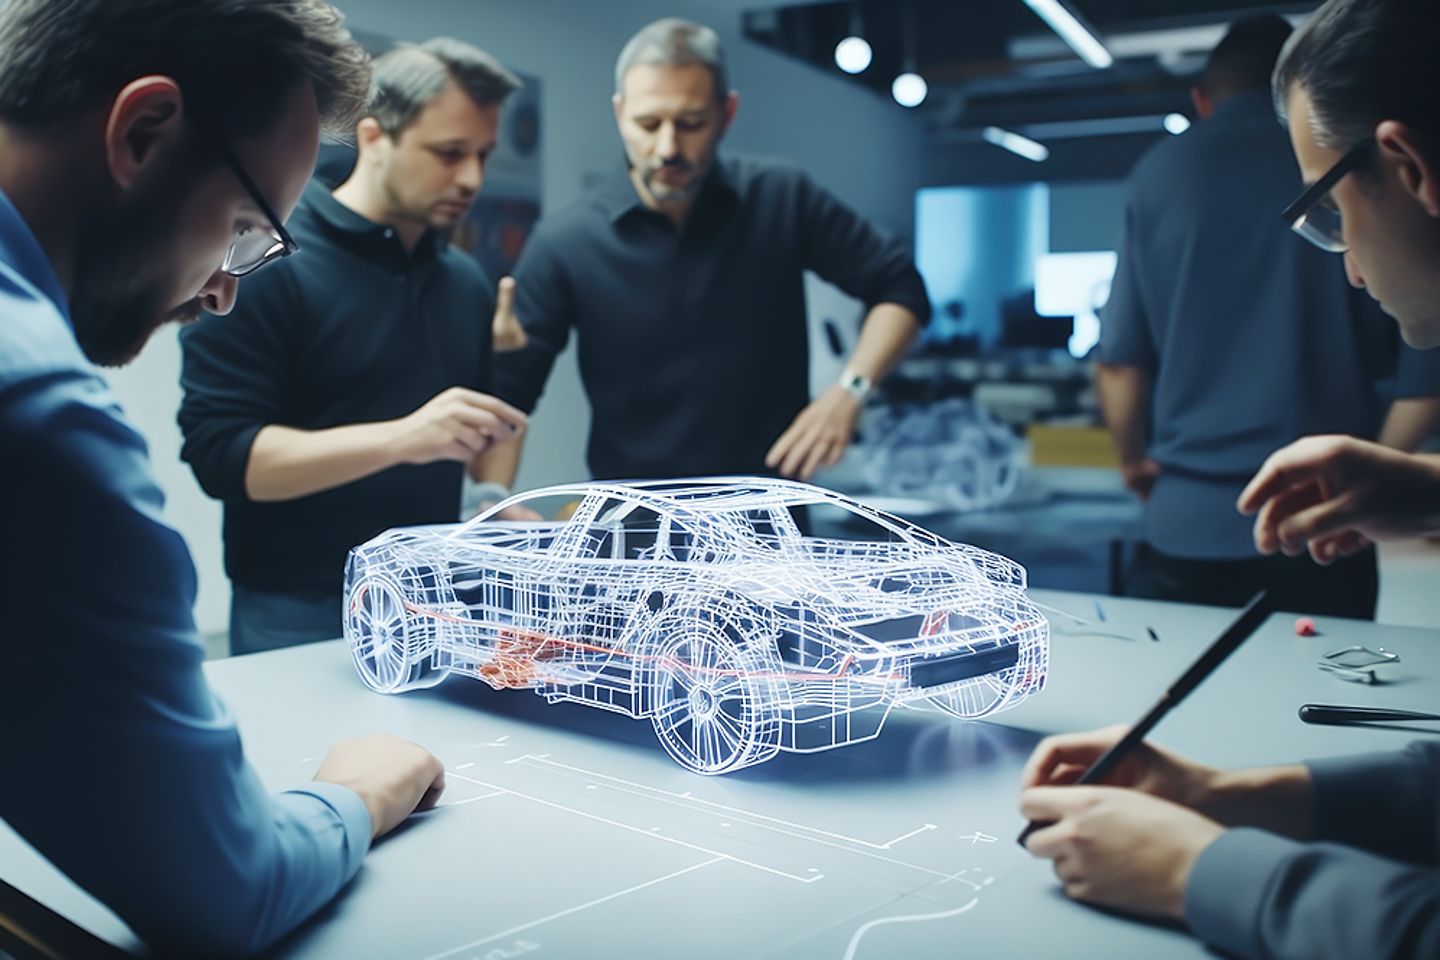 Engineers design future cars in car factory